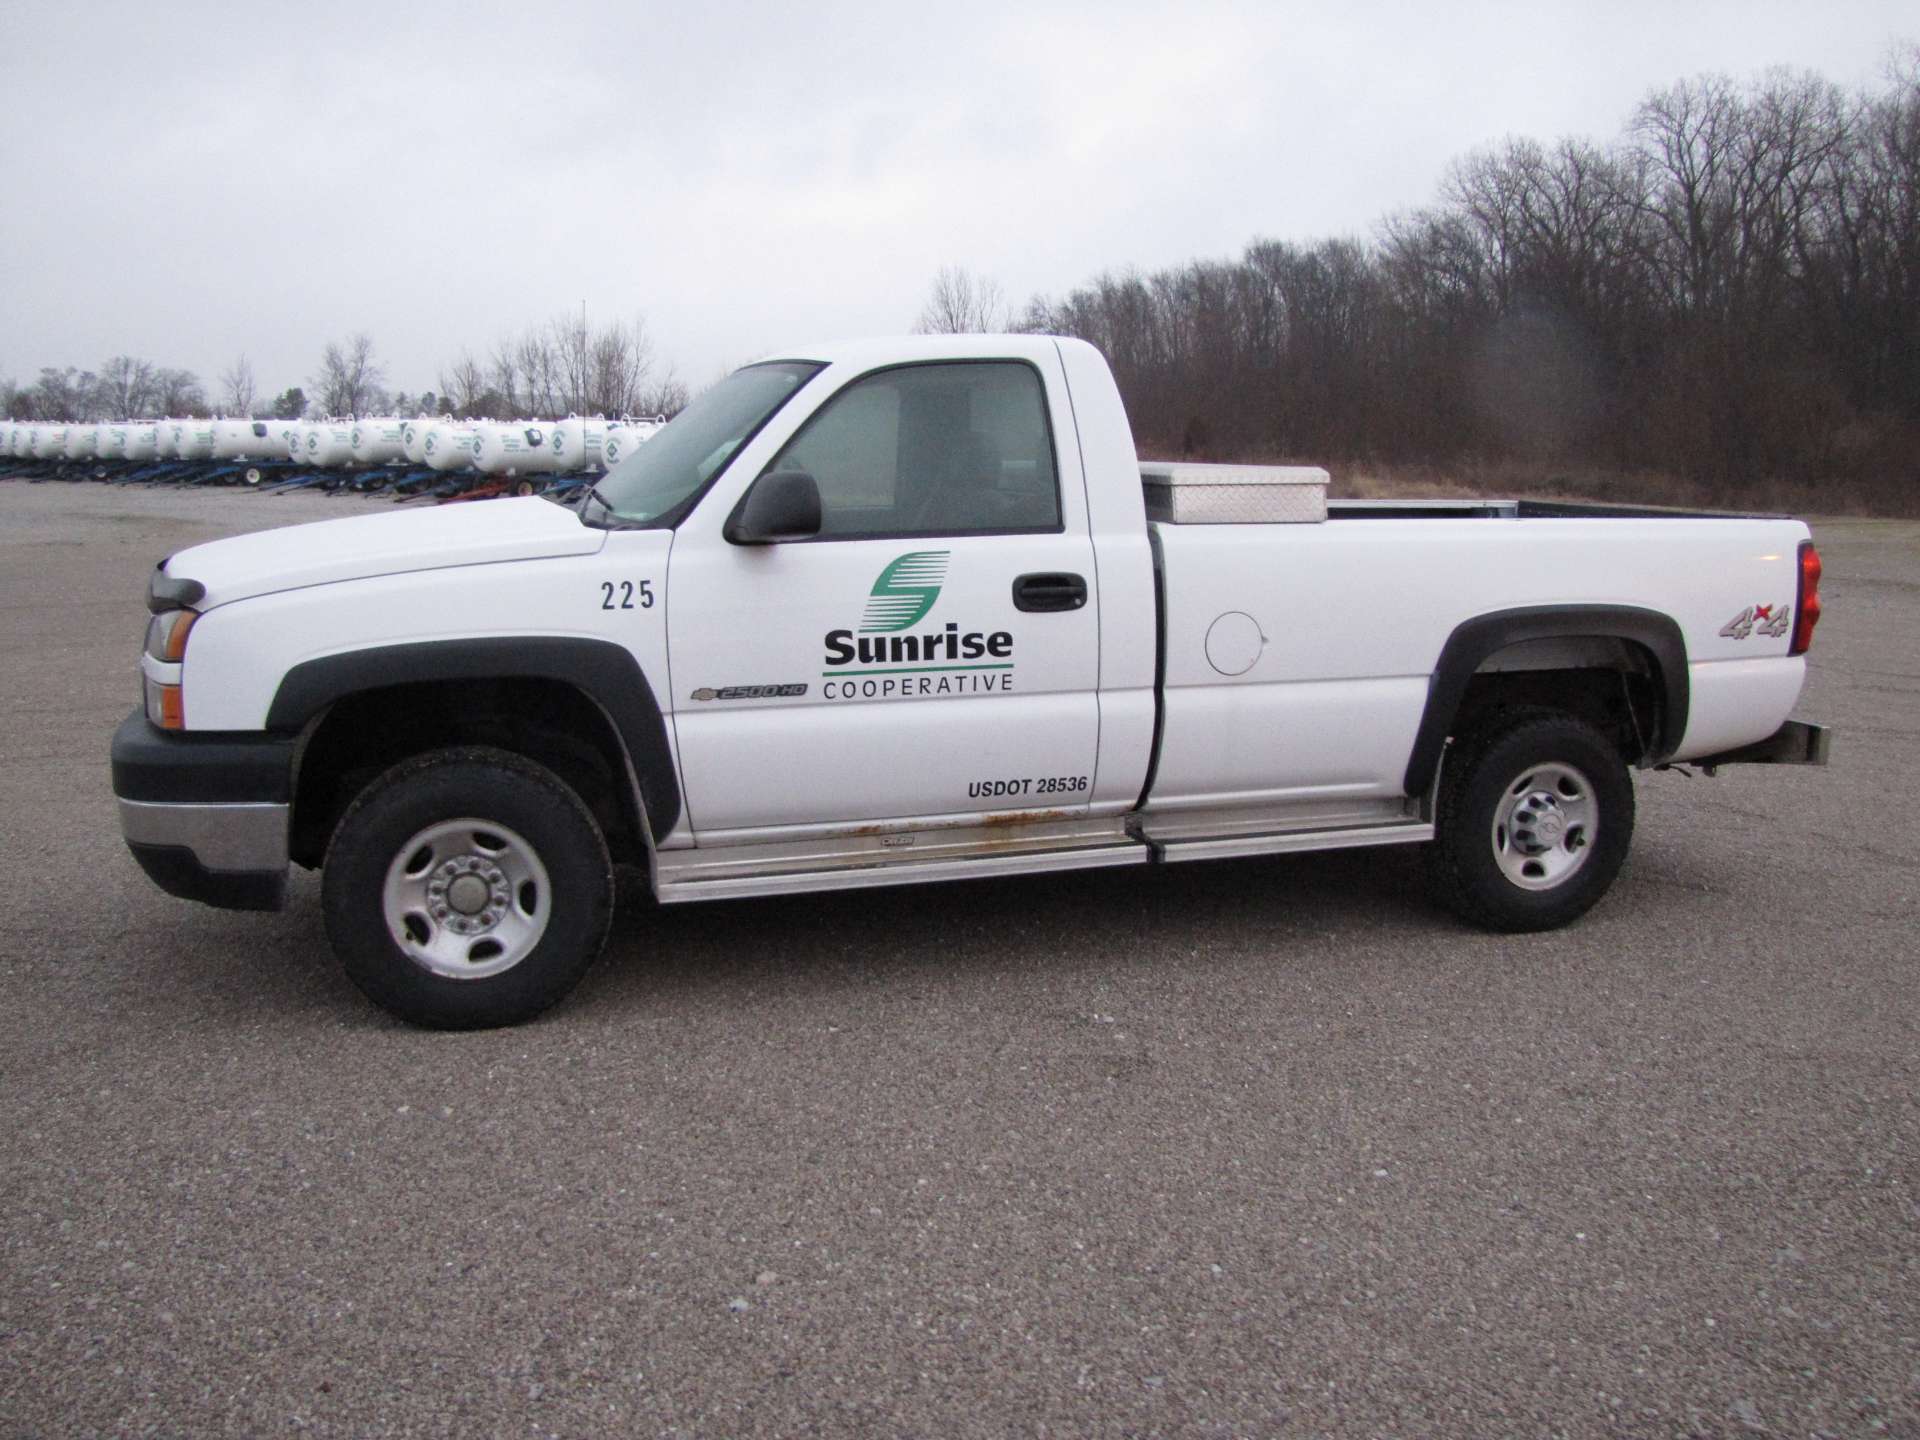 2006 Chevy 2500 HD pickup truck - Image 2 of 65